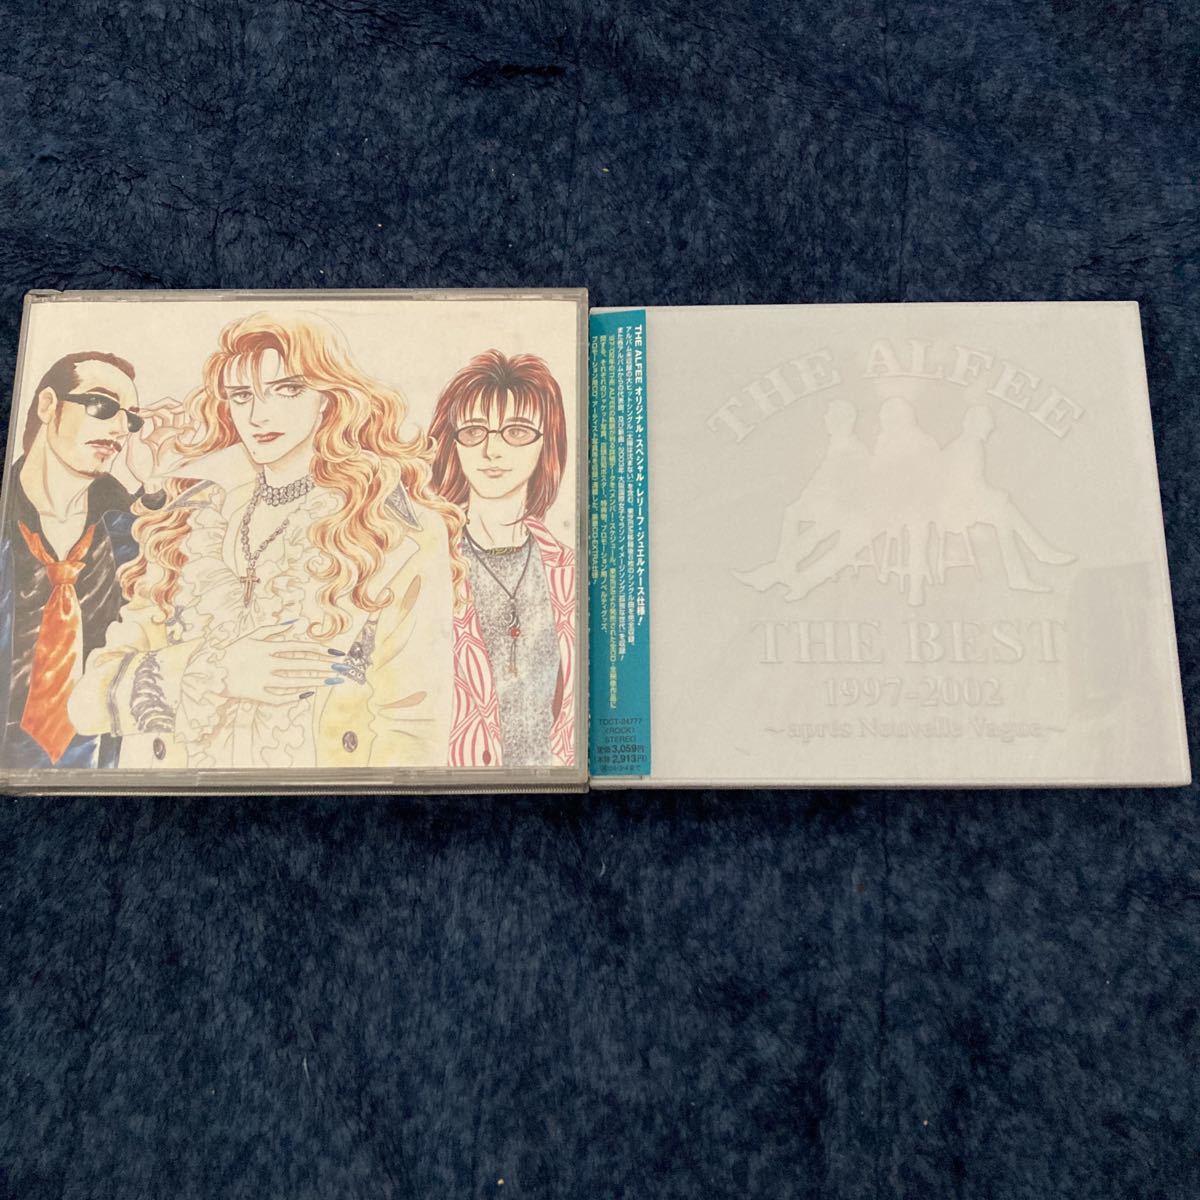 THE ALFEE 3枚組CD 30th ANNIVERSARY HIT SINGLE COLLECTION 37+THE BEST 1997-2002 セット_画像1